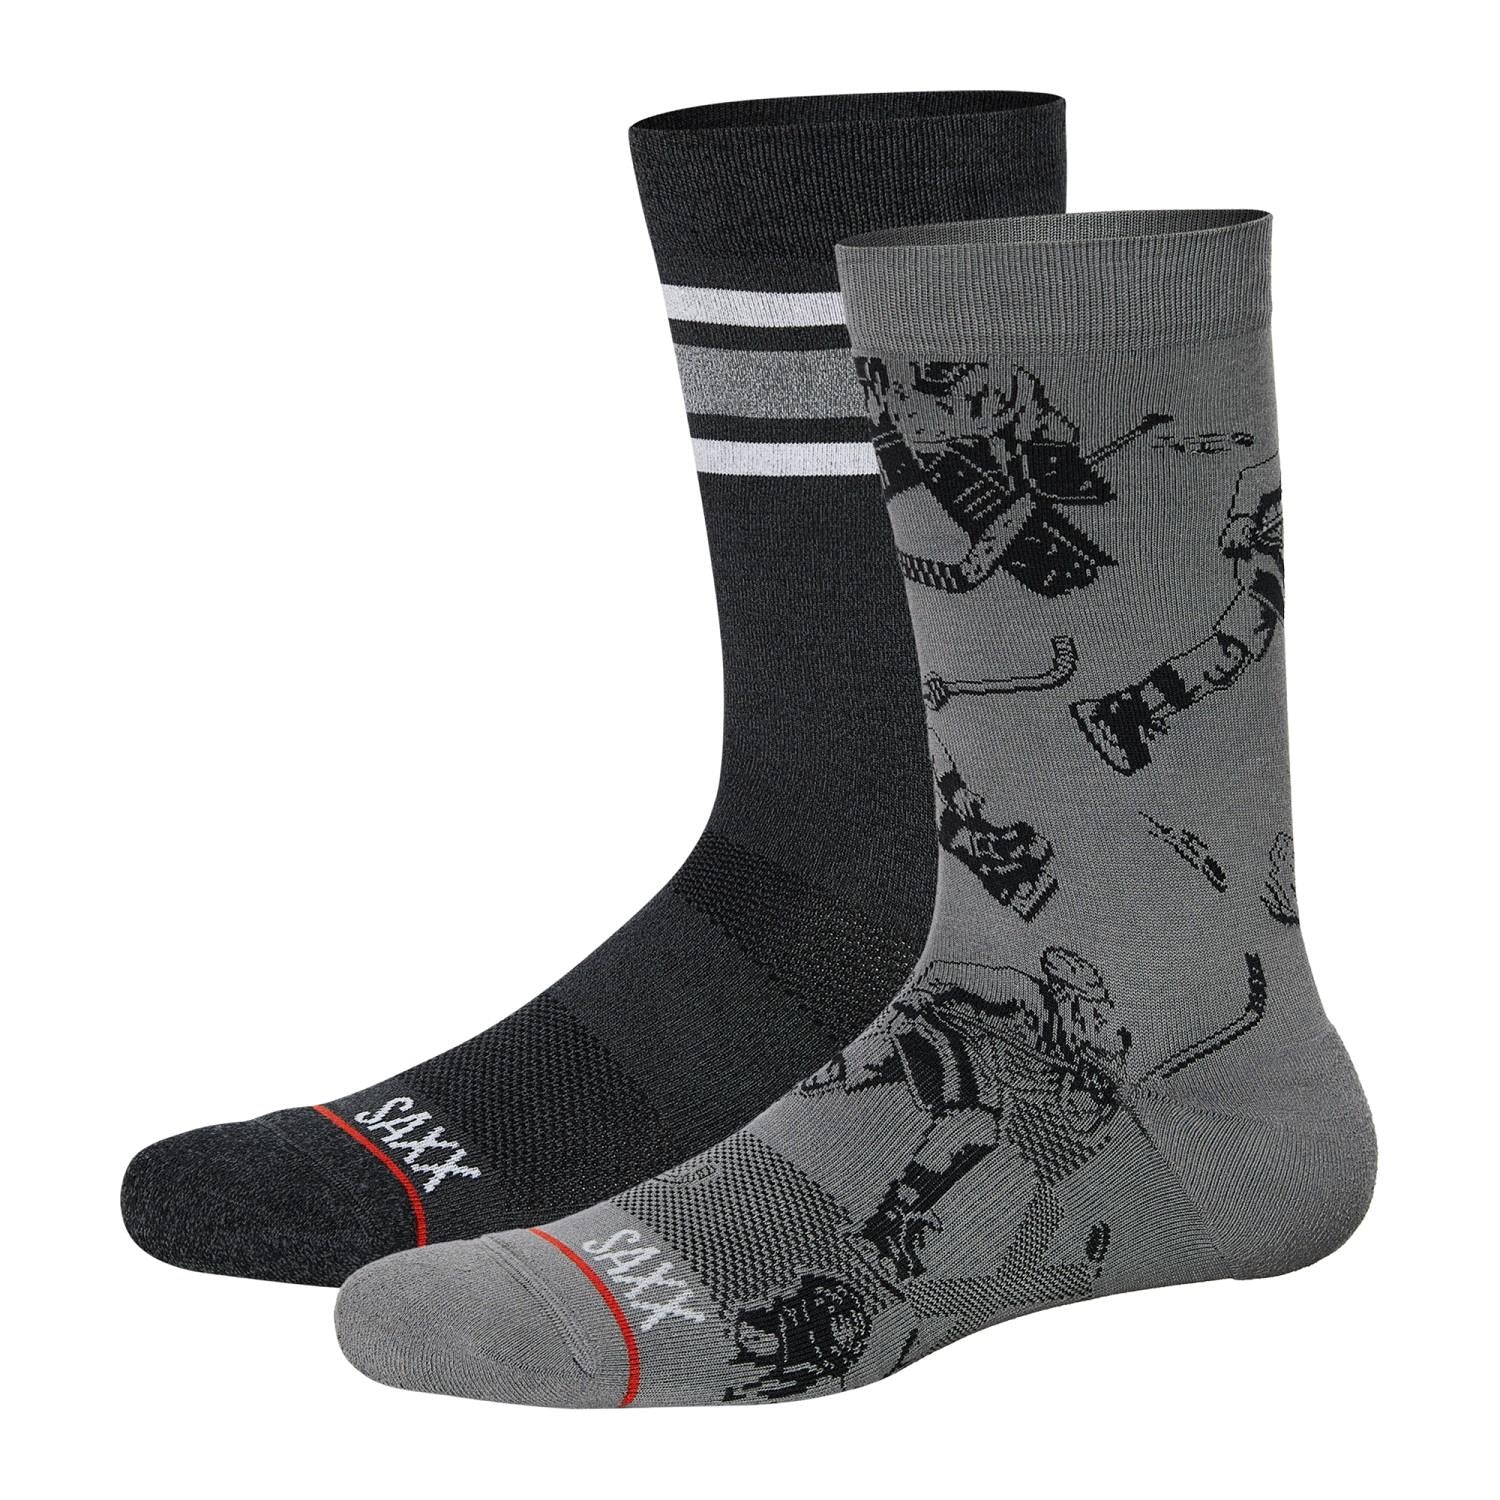 Saxx Whole Package Crew Socks 2 Pack